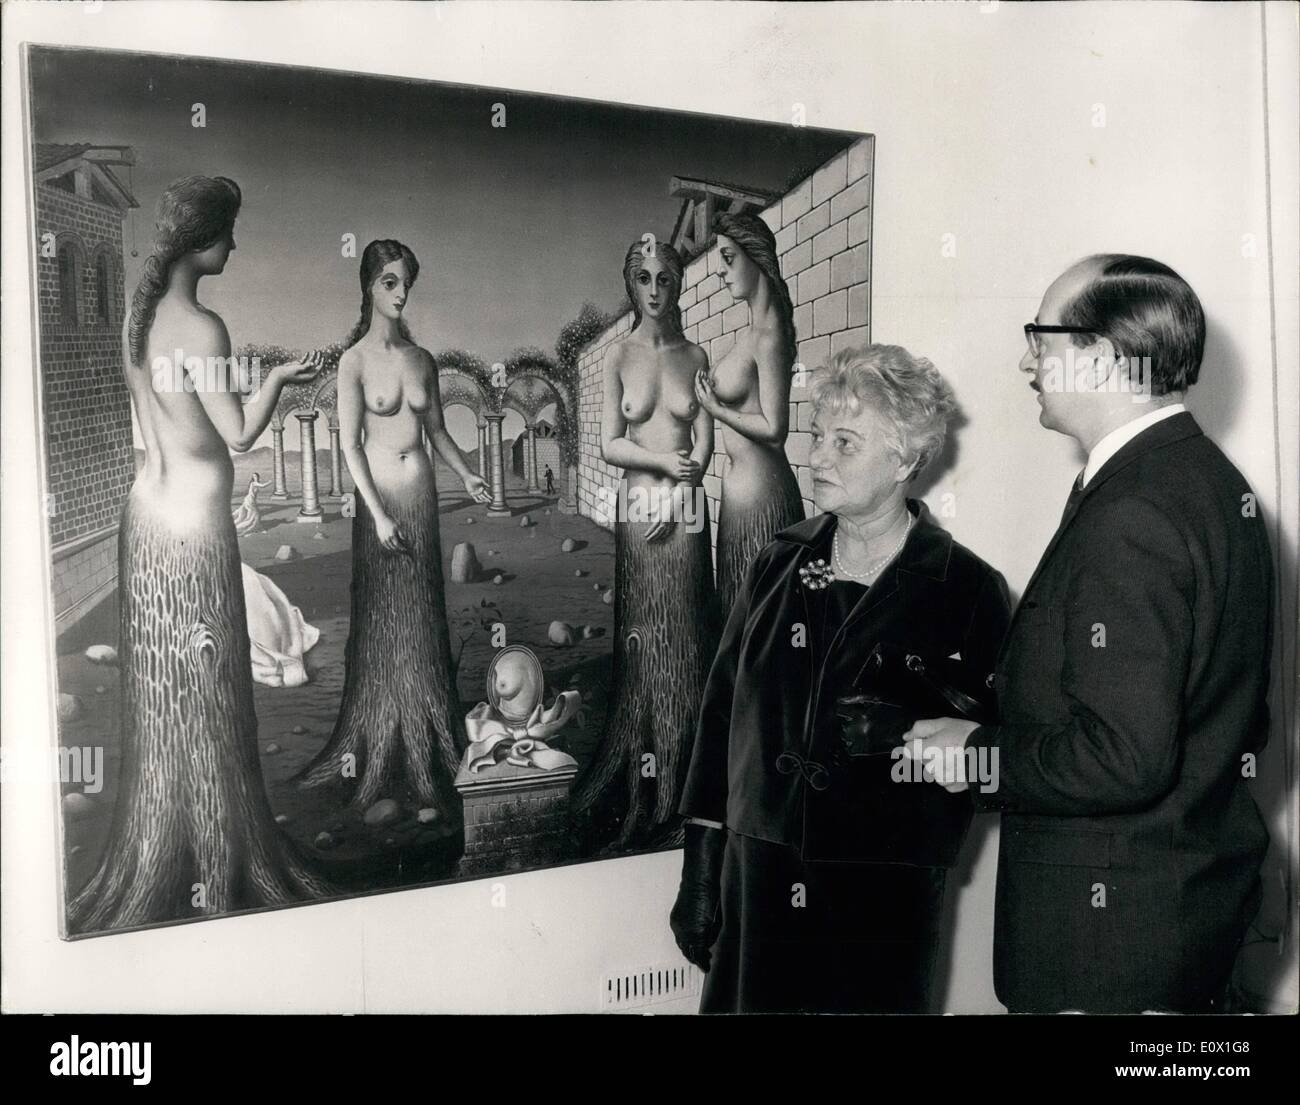 Dec. 12, 1964 - Peggy Guggenheim's Art Collection On Show In London: TYhe exhibition of Peggy Guggenheim's art collection -said Stock Photo